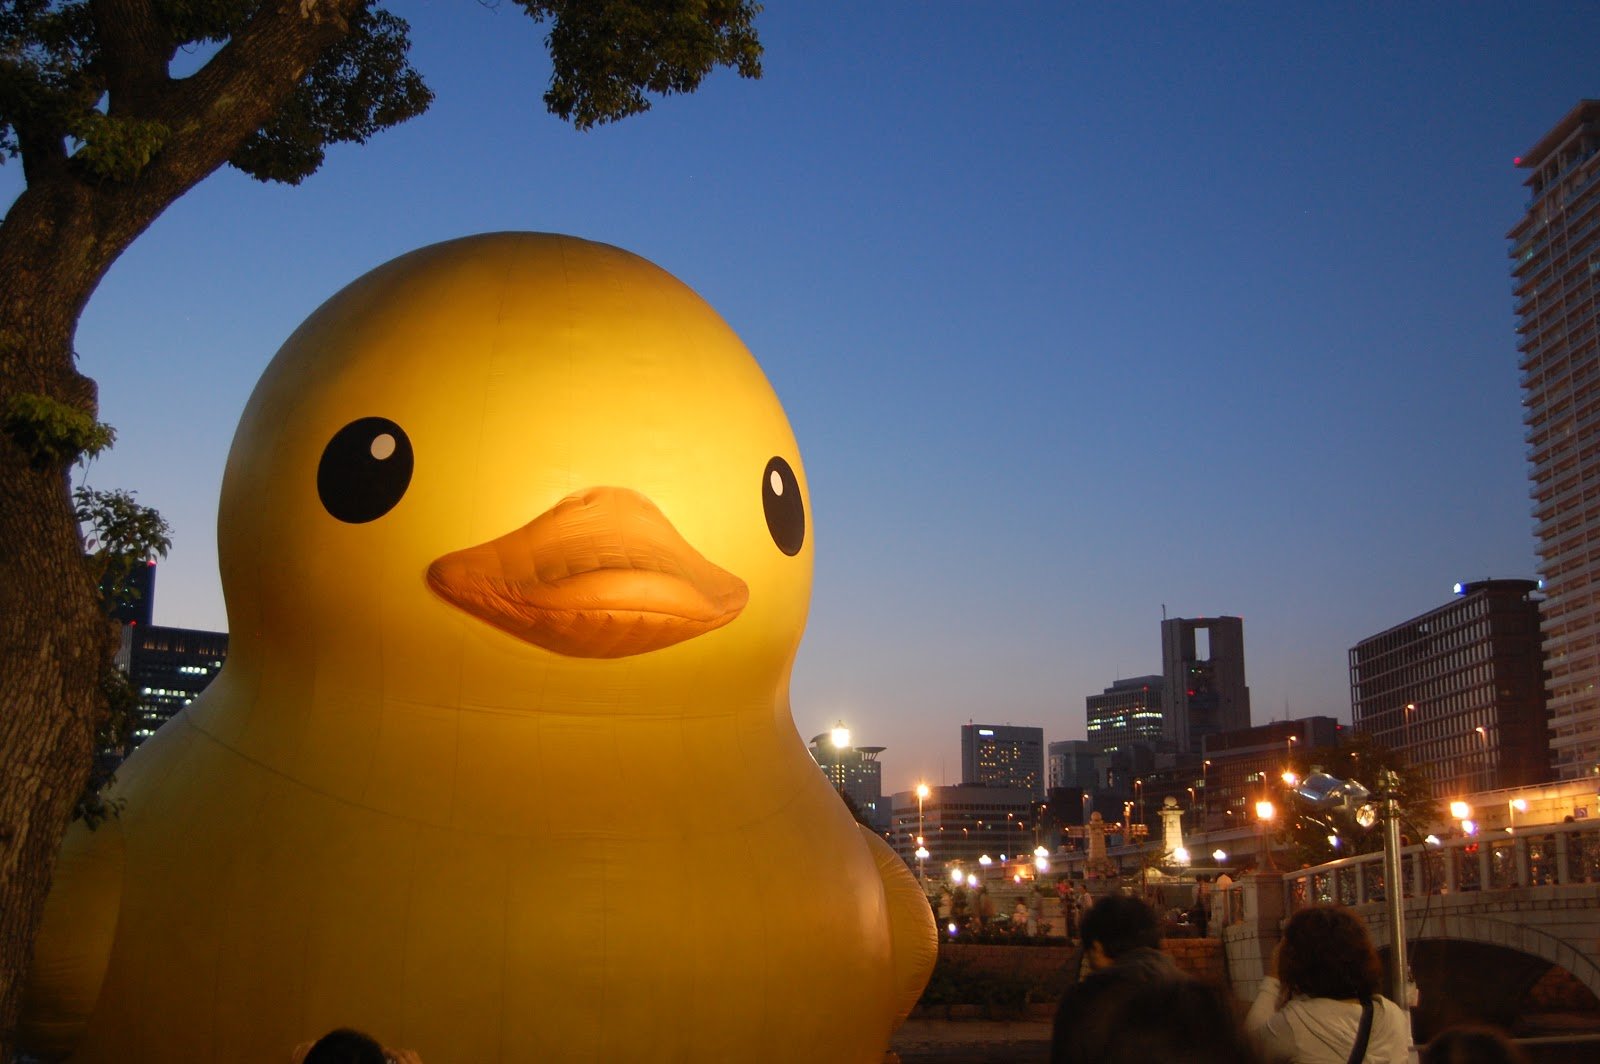 Giant Rubber Duck Wallpaper and saw a giant rubber duck